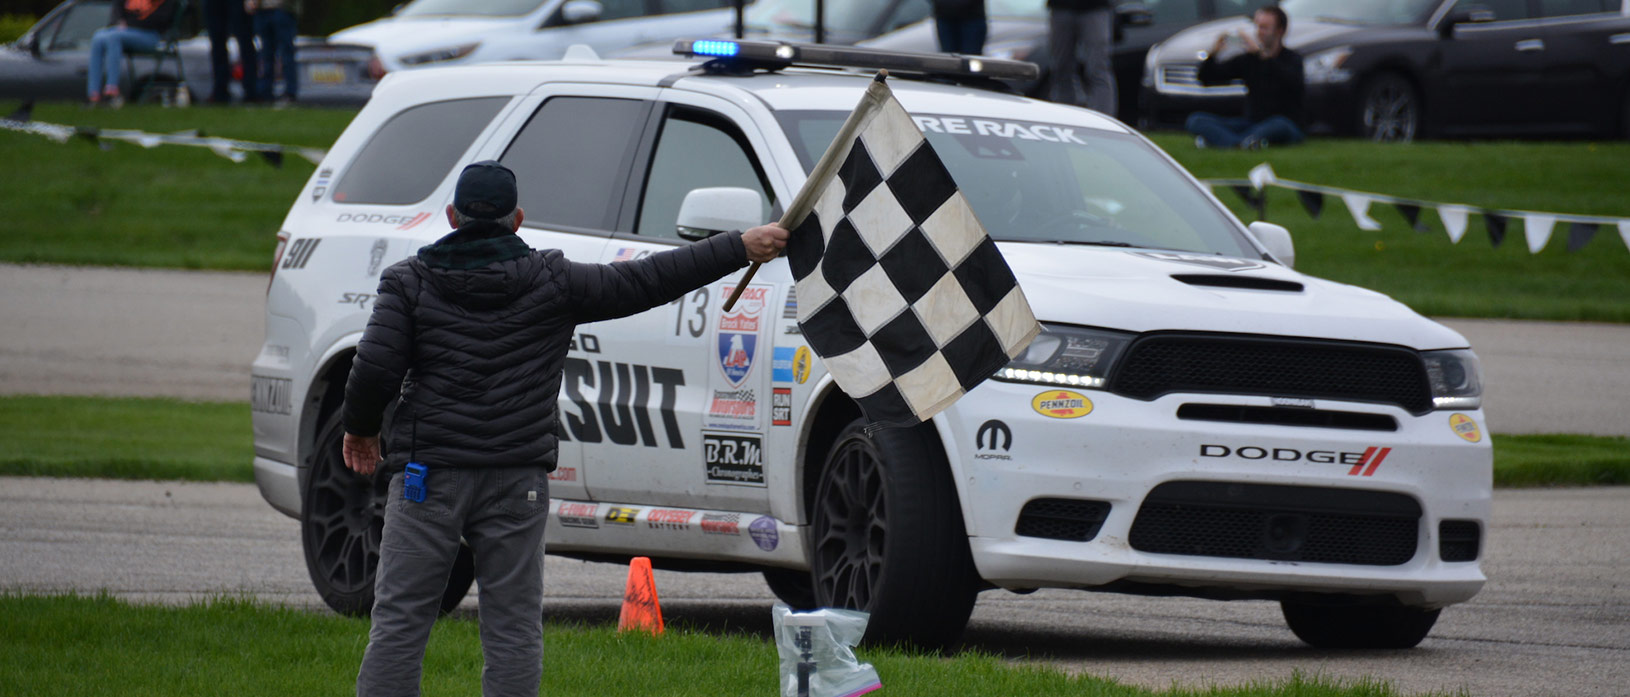 Durango SRT Pursuit driving up on the checkered flag